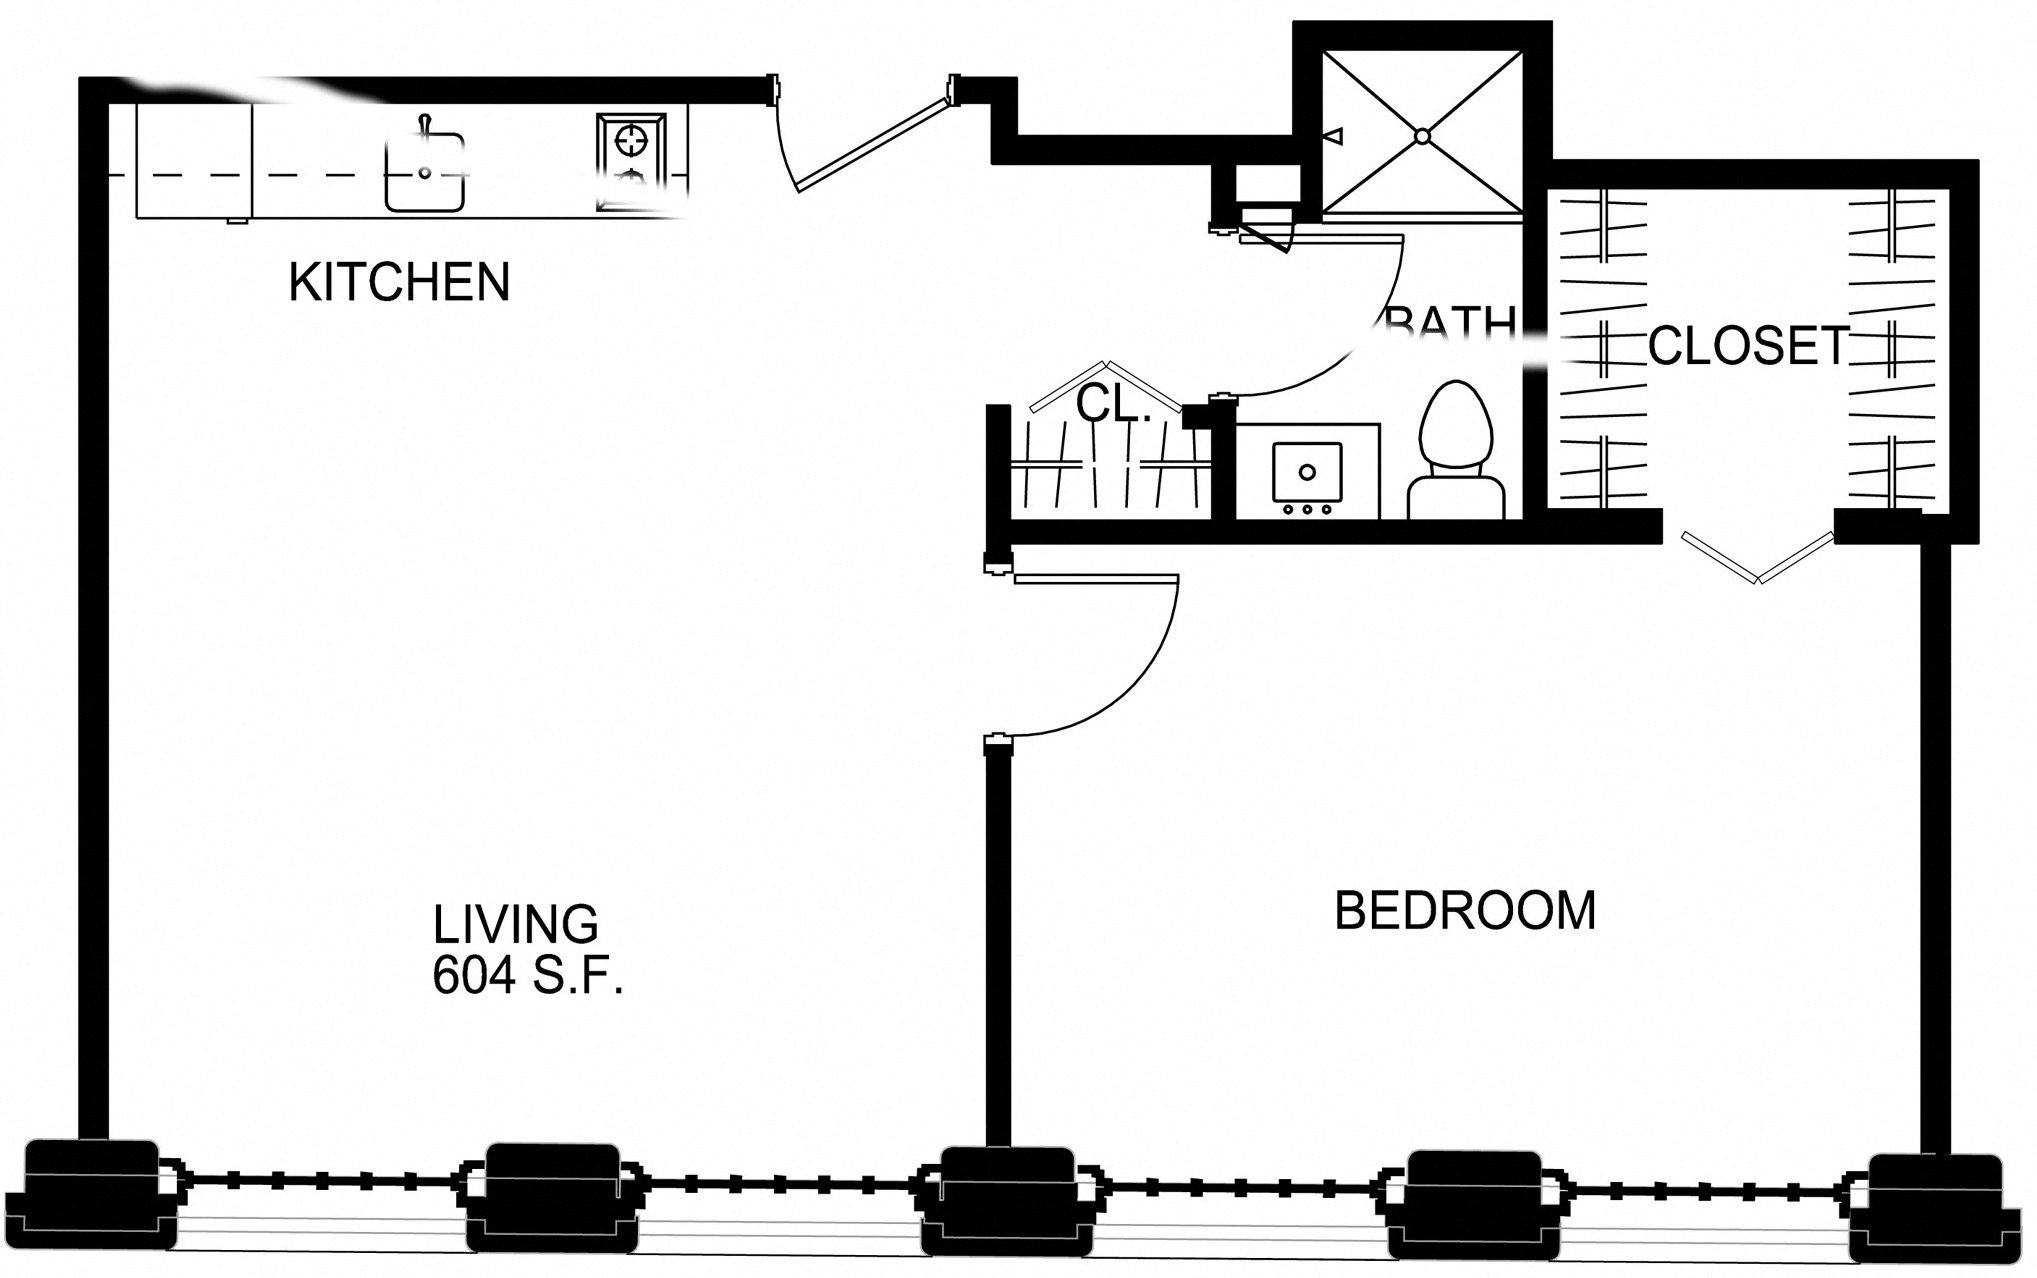 Floorplan for Apartment #S2639, 1 bedroom unit at Halstead Providence